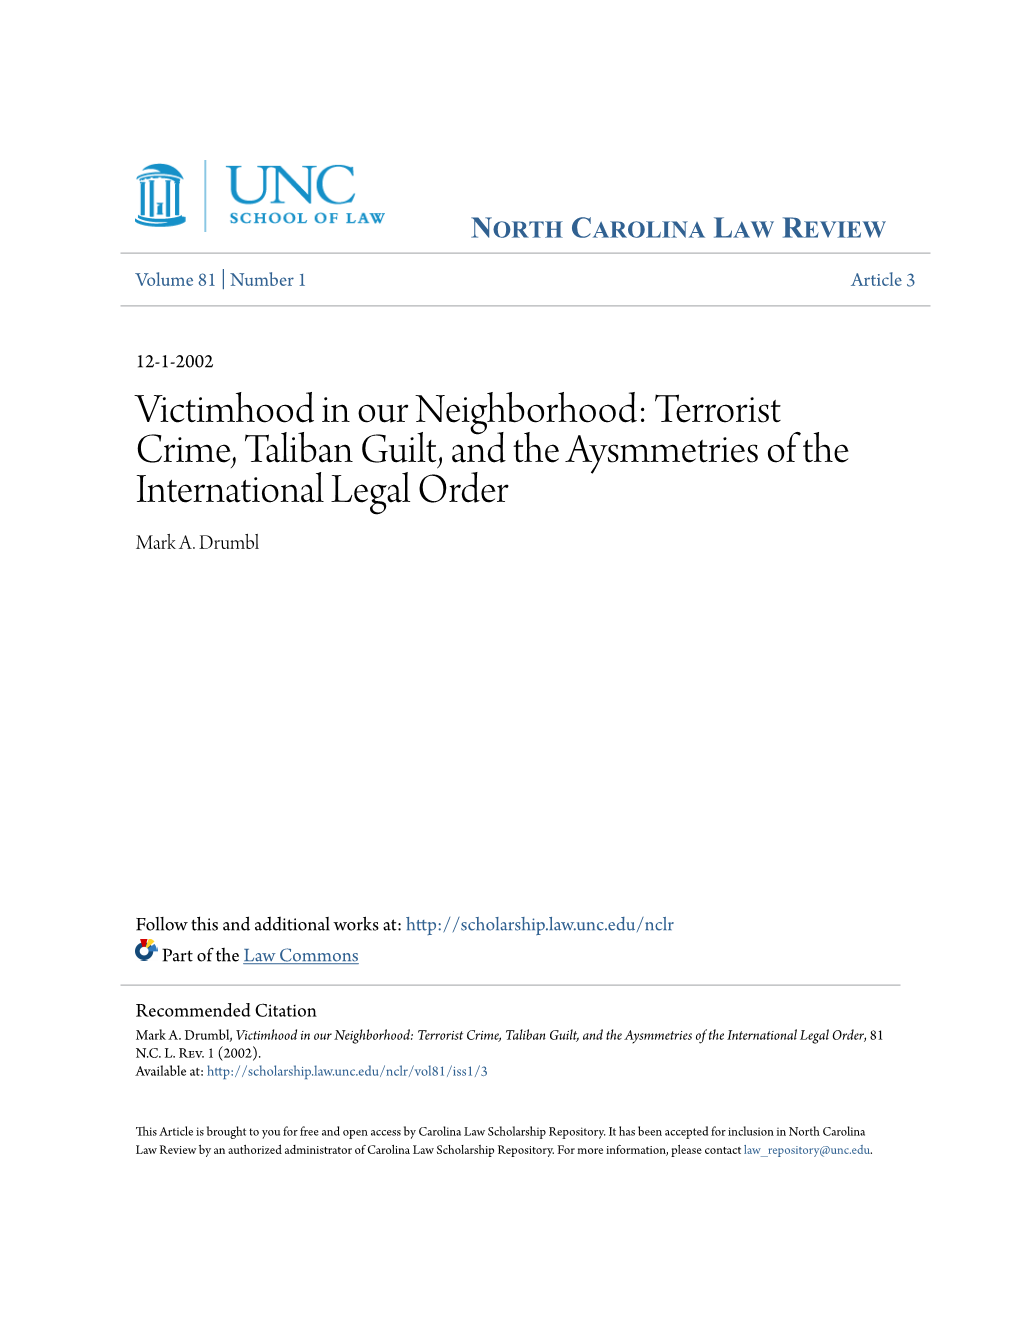 Terrorist Crime, Taliban Guilt, and the Aysmmetries of the International Legal Order Mark A